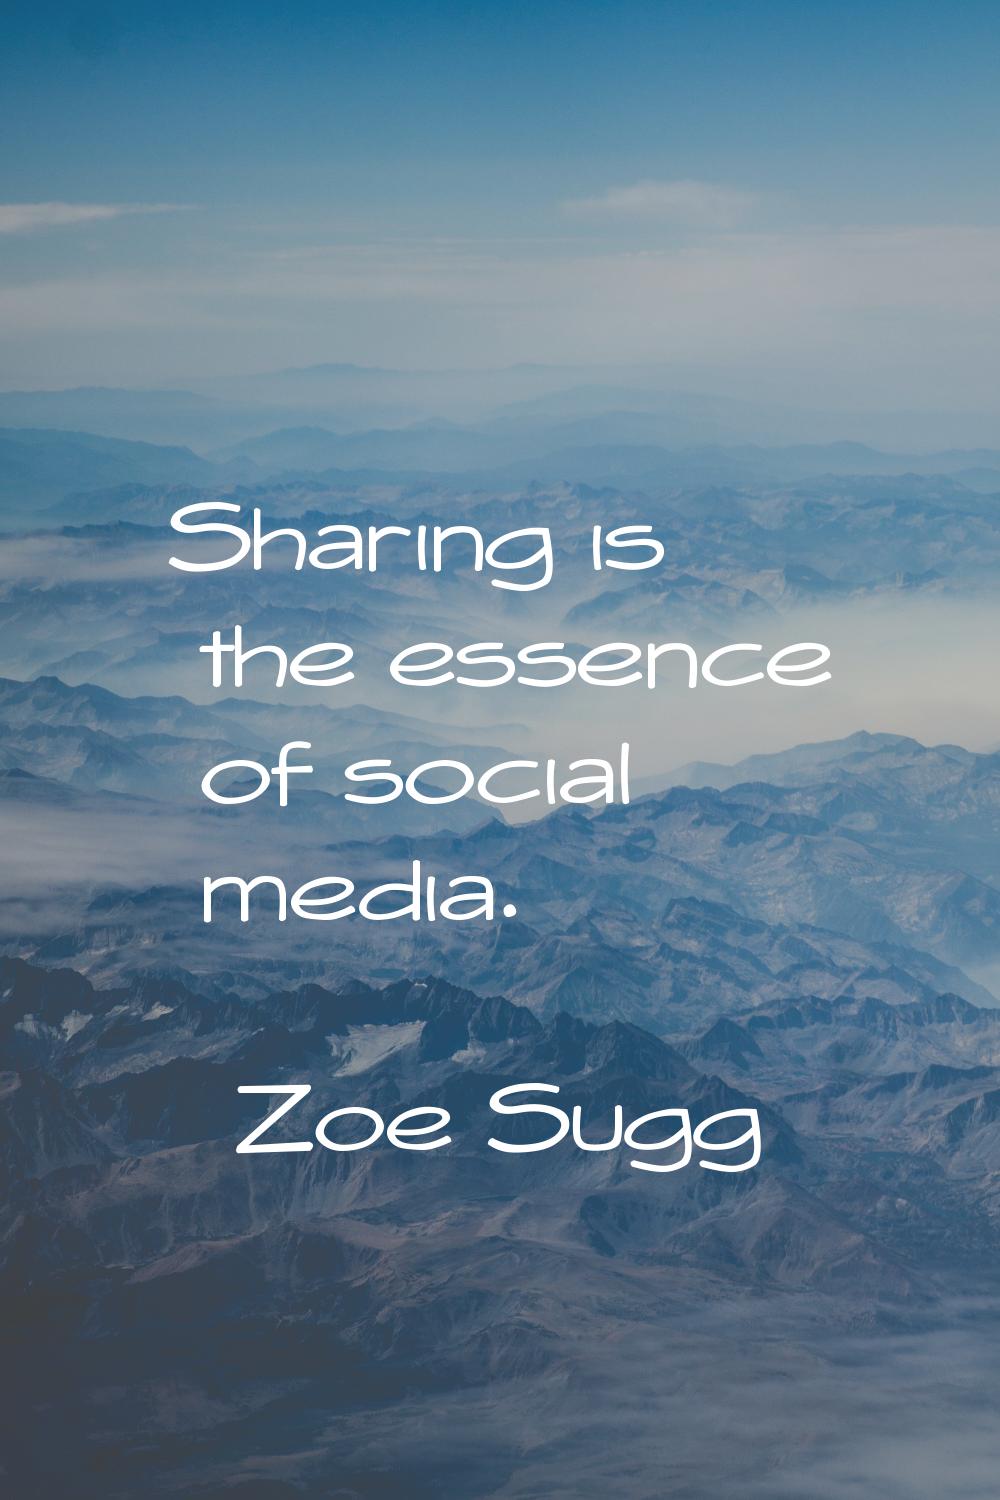 Sharing is the essence of social media.